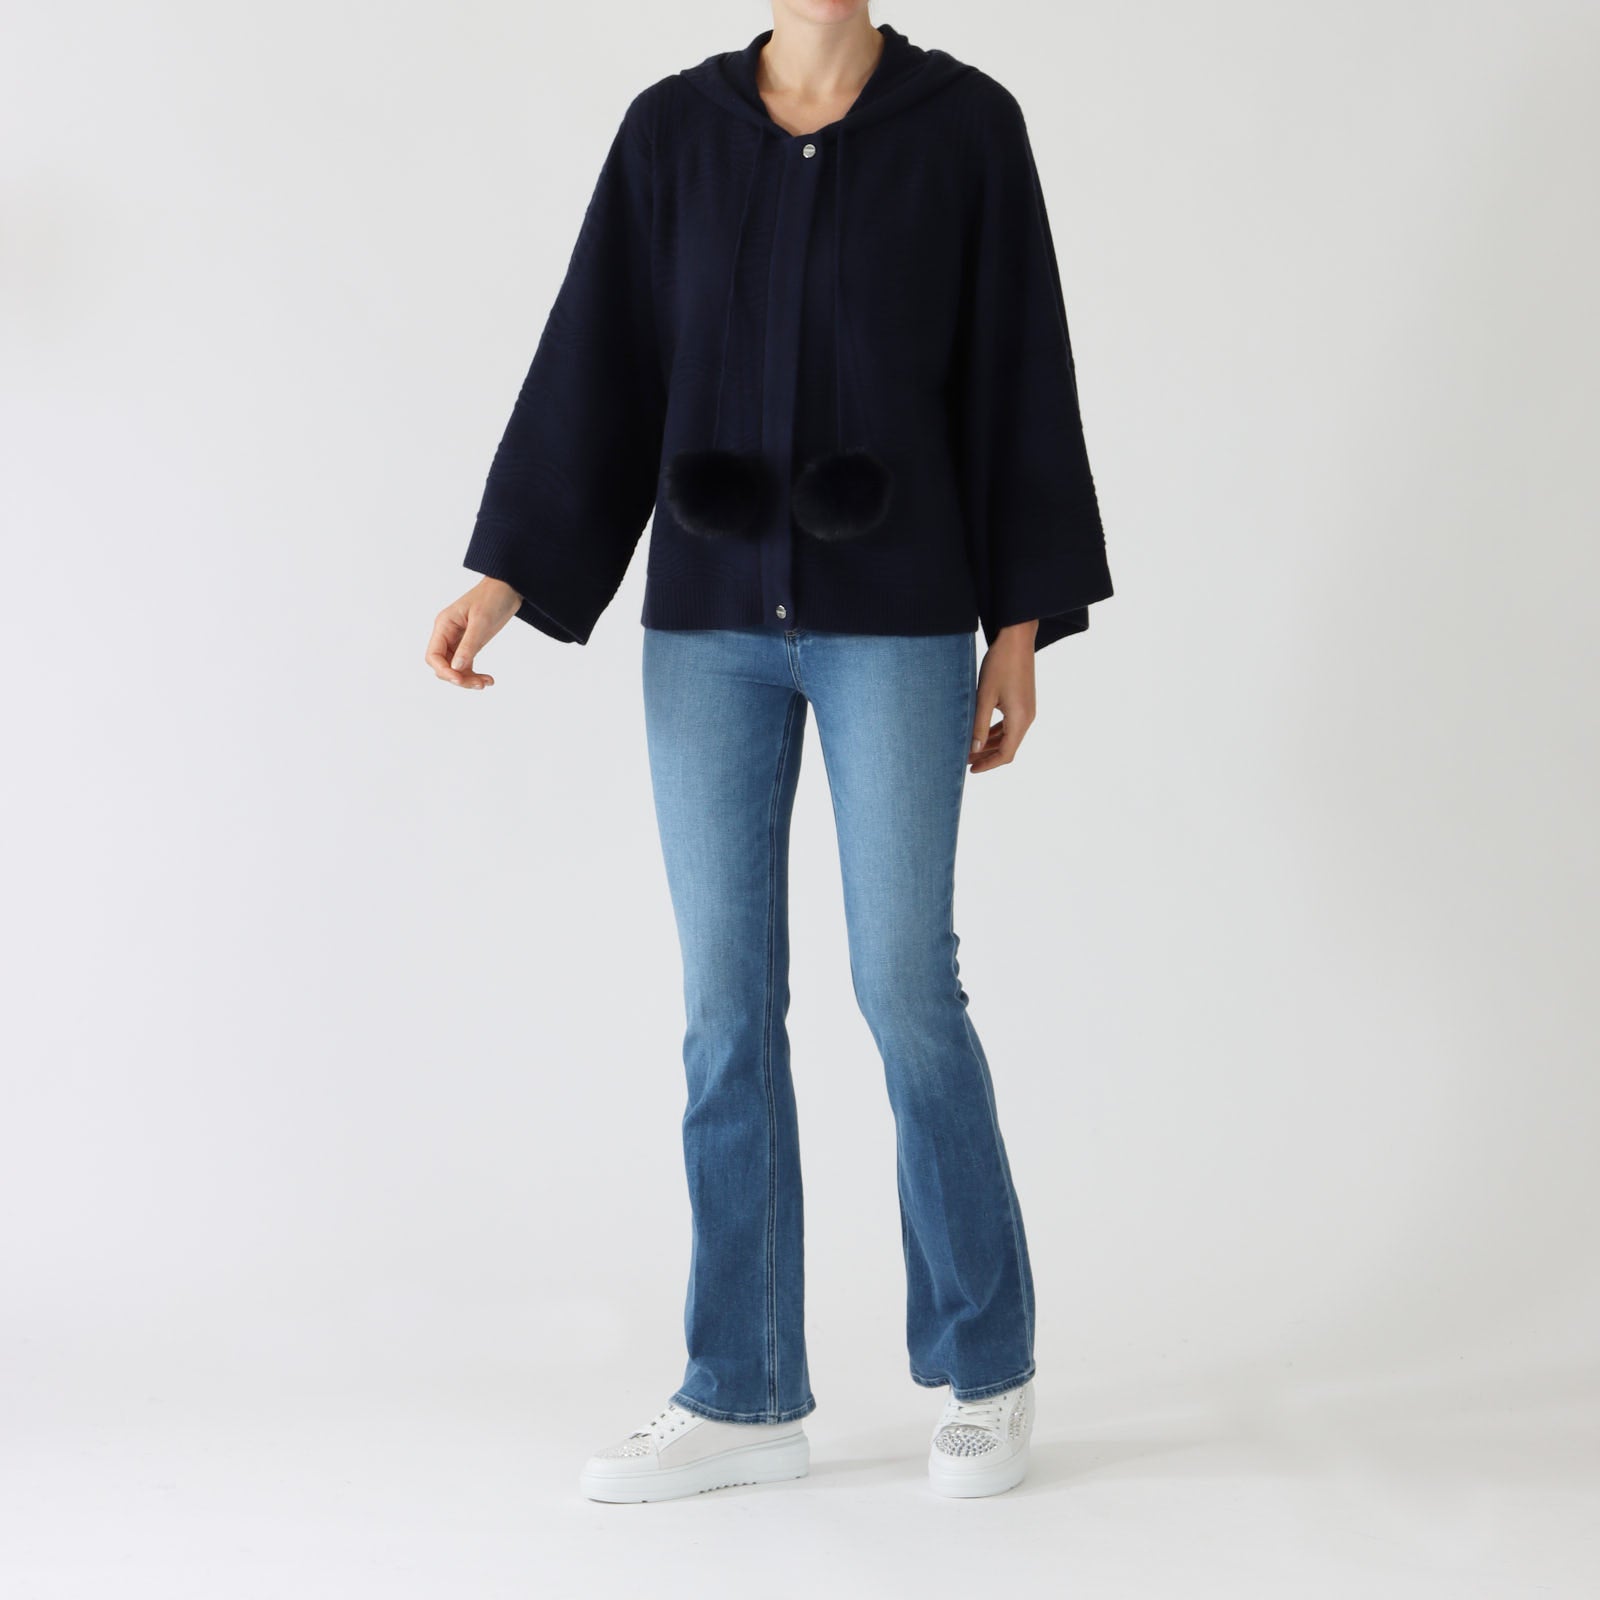 Louis Navy Cashmere Blend Hooded Cardigan